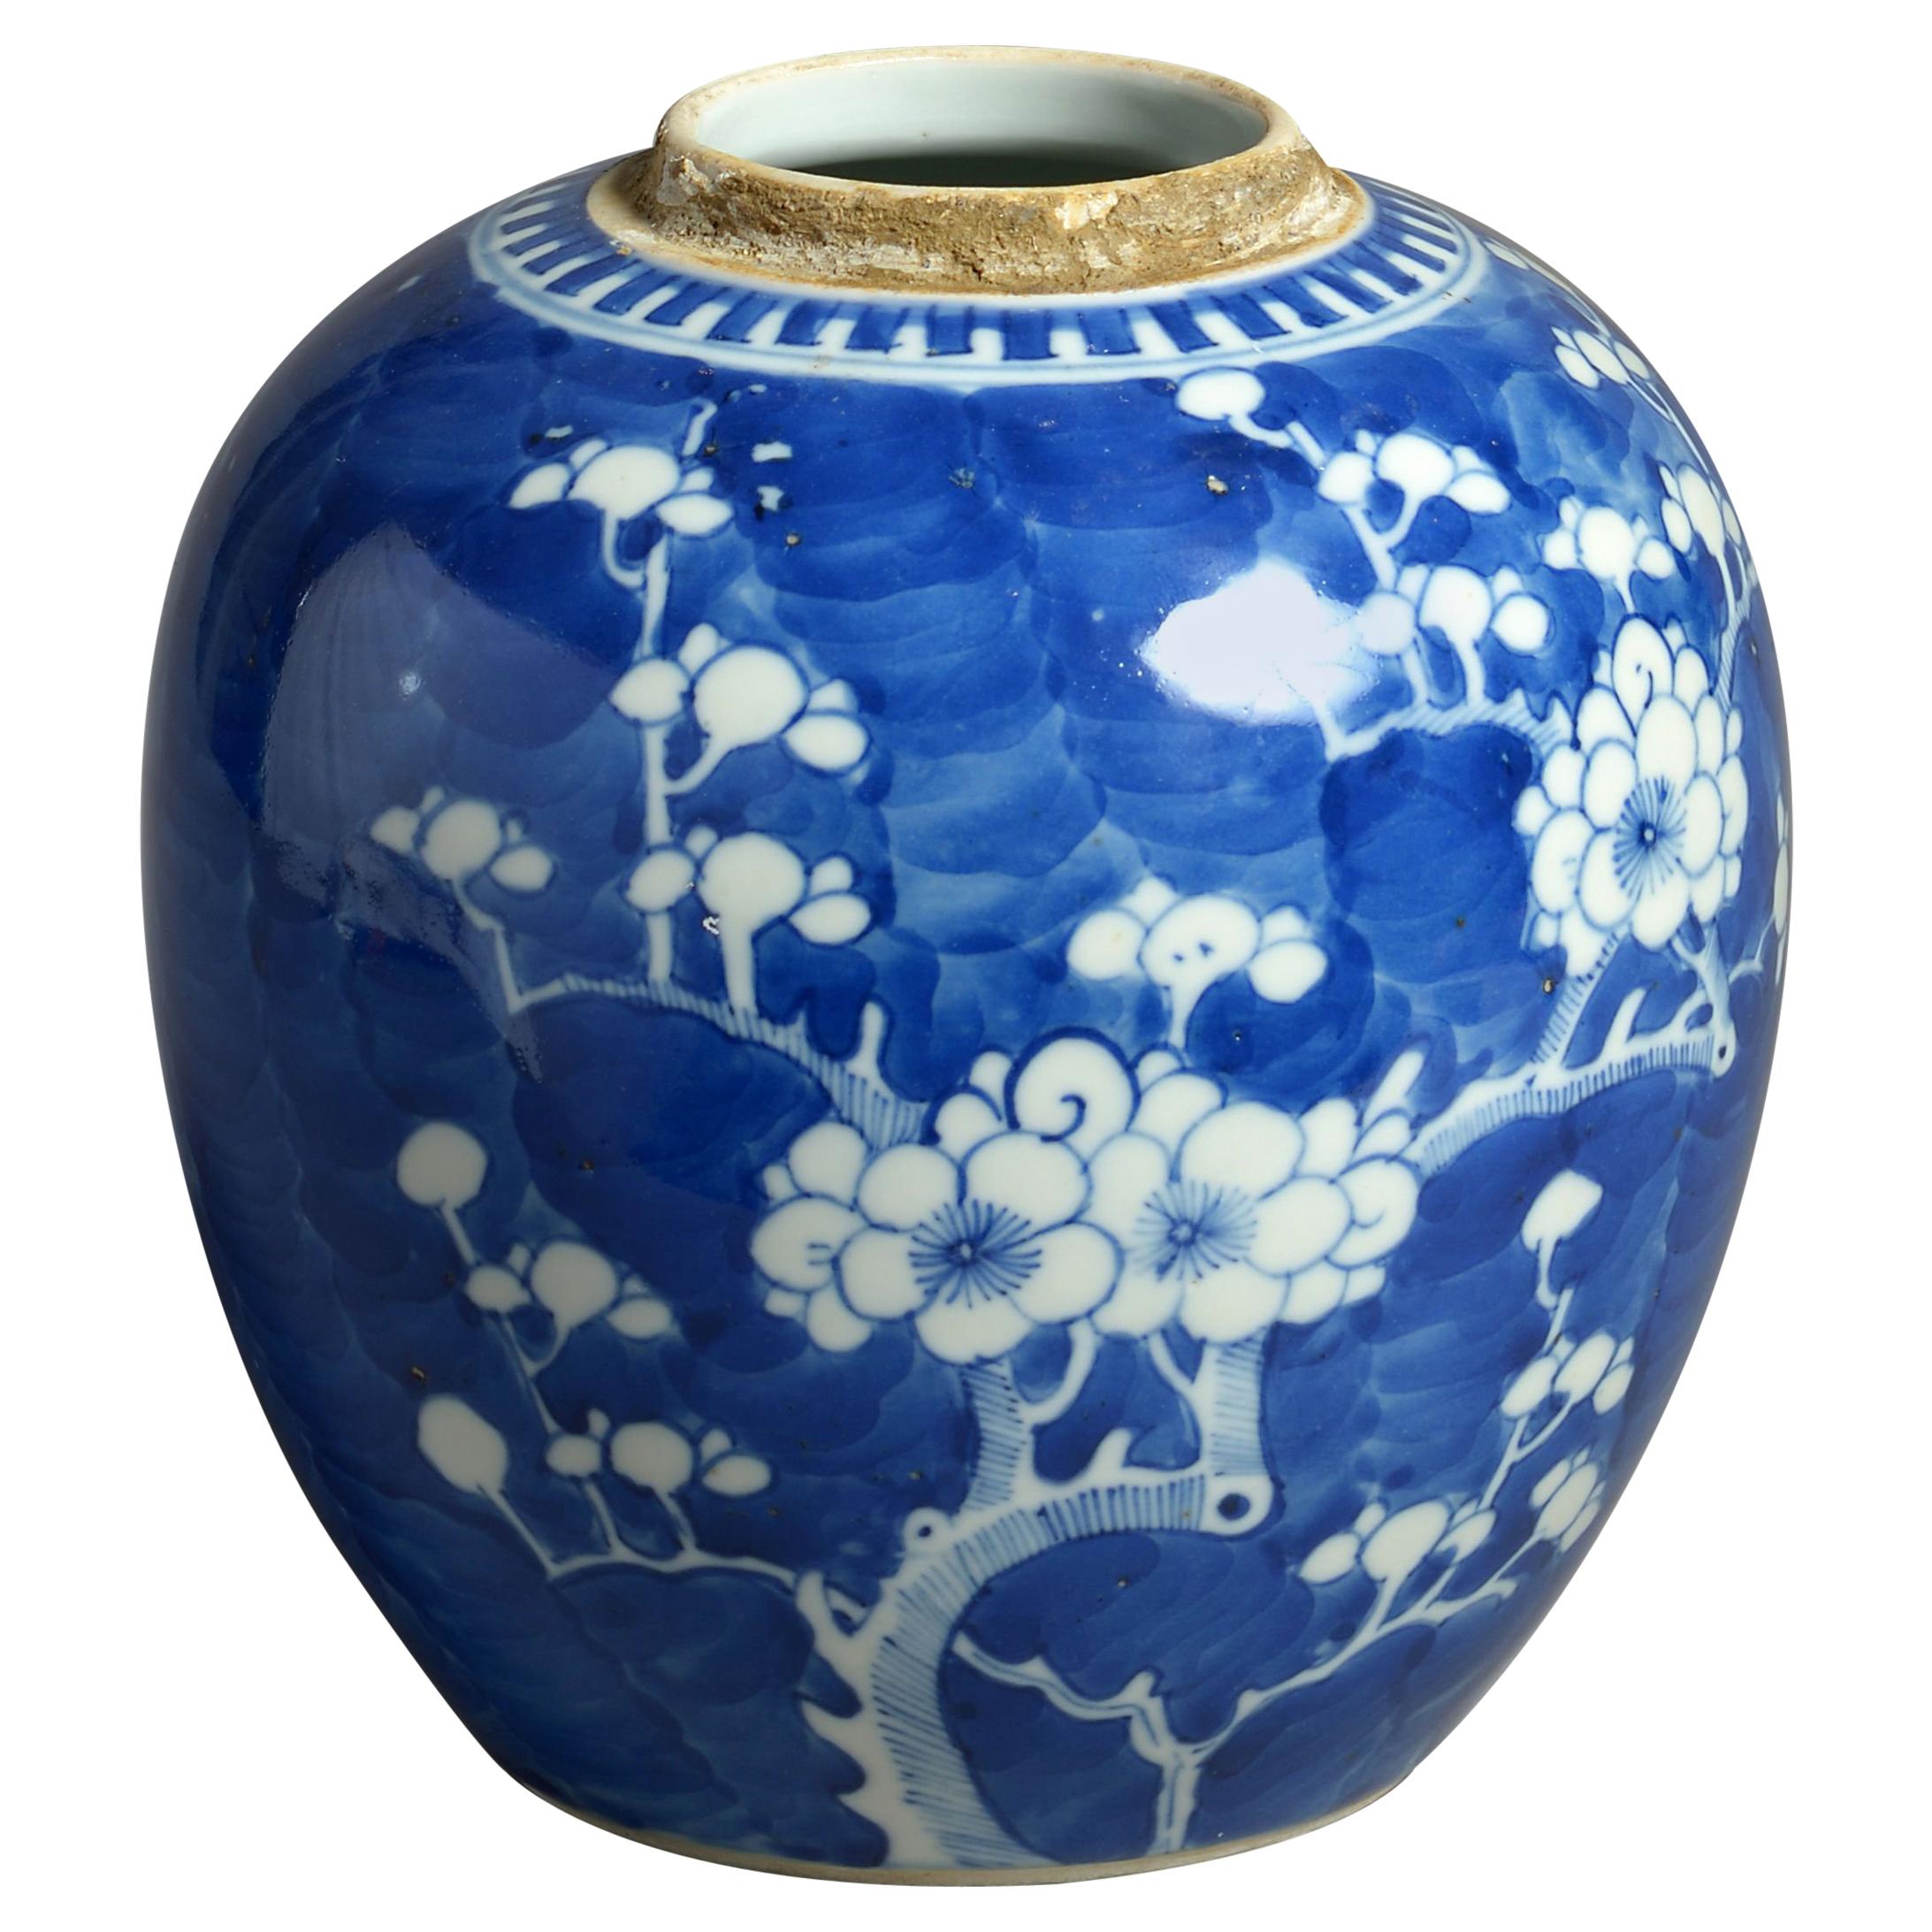 19th Century Blue and White Porcelain Jar